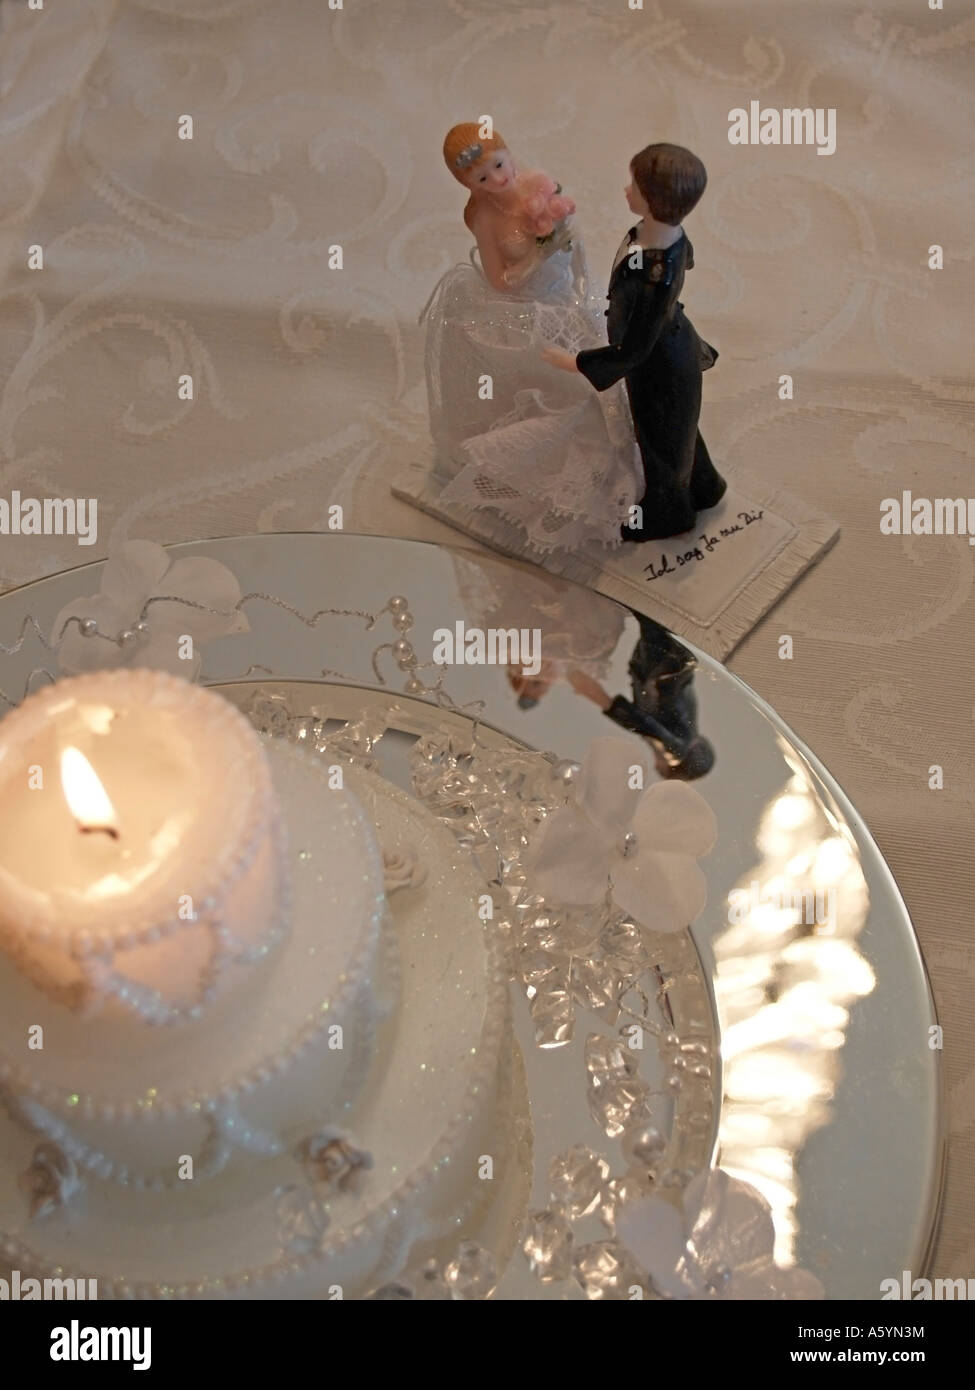 decoration for marriage little figures with bride and groom bridal pair beneath a burning candle on a table Stock Photo